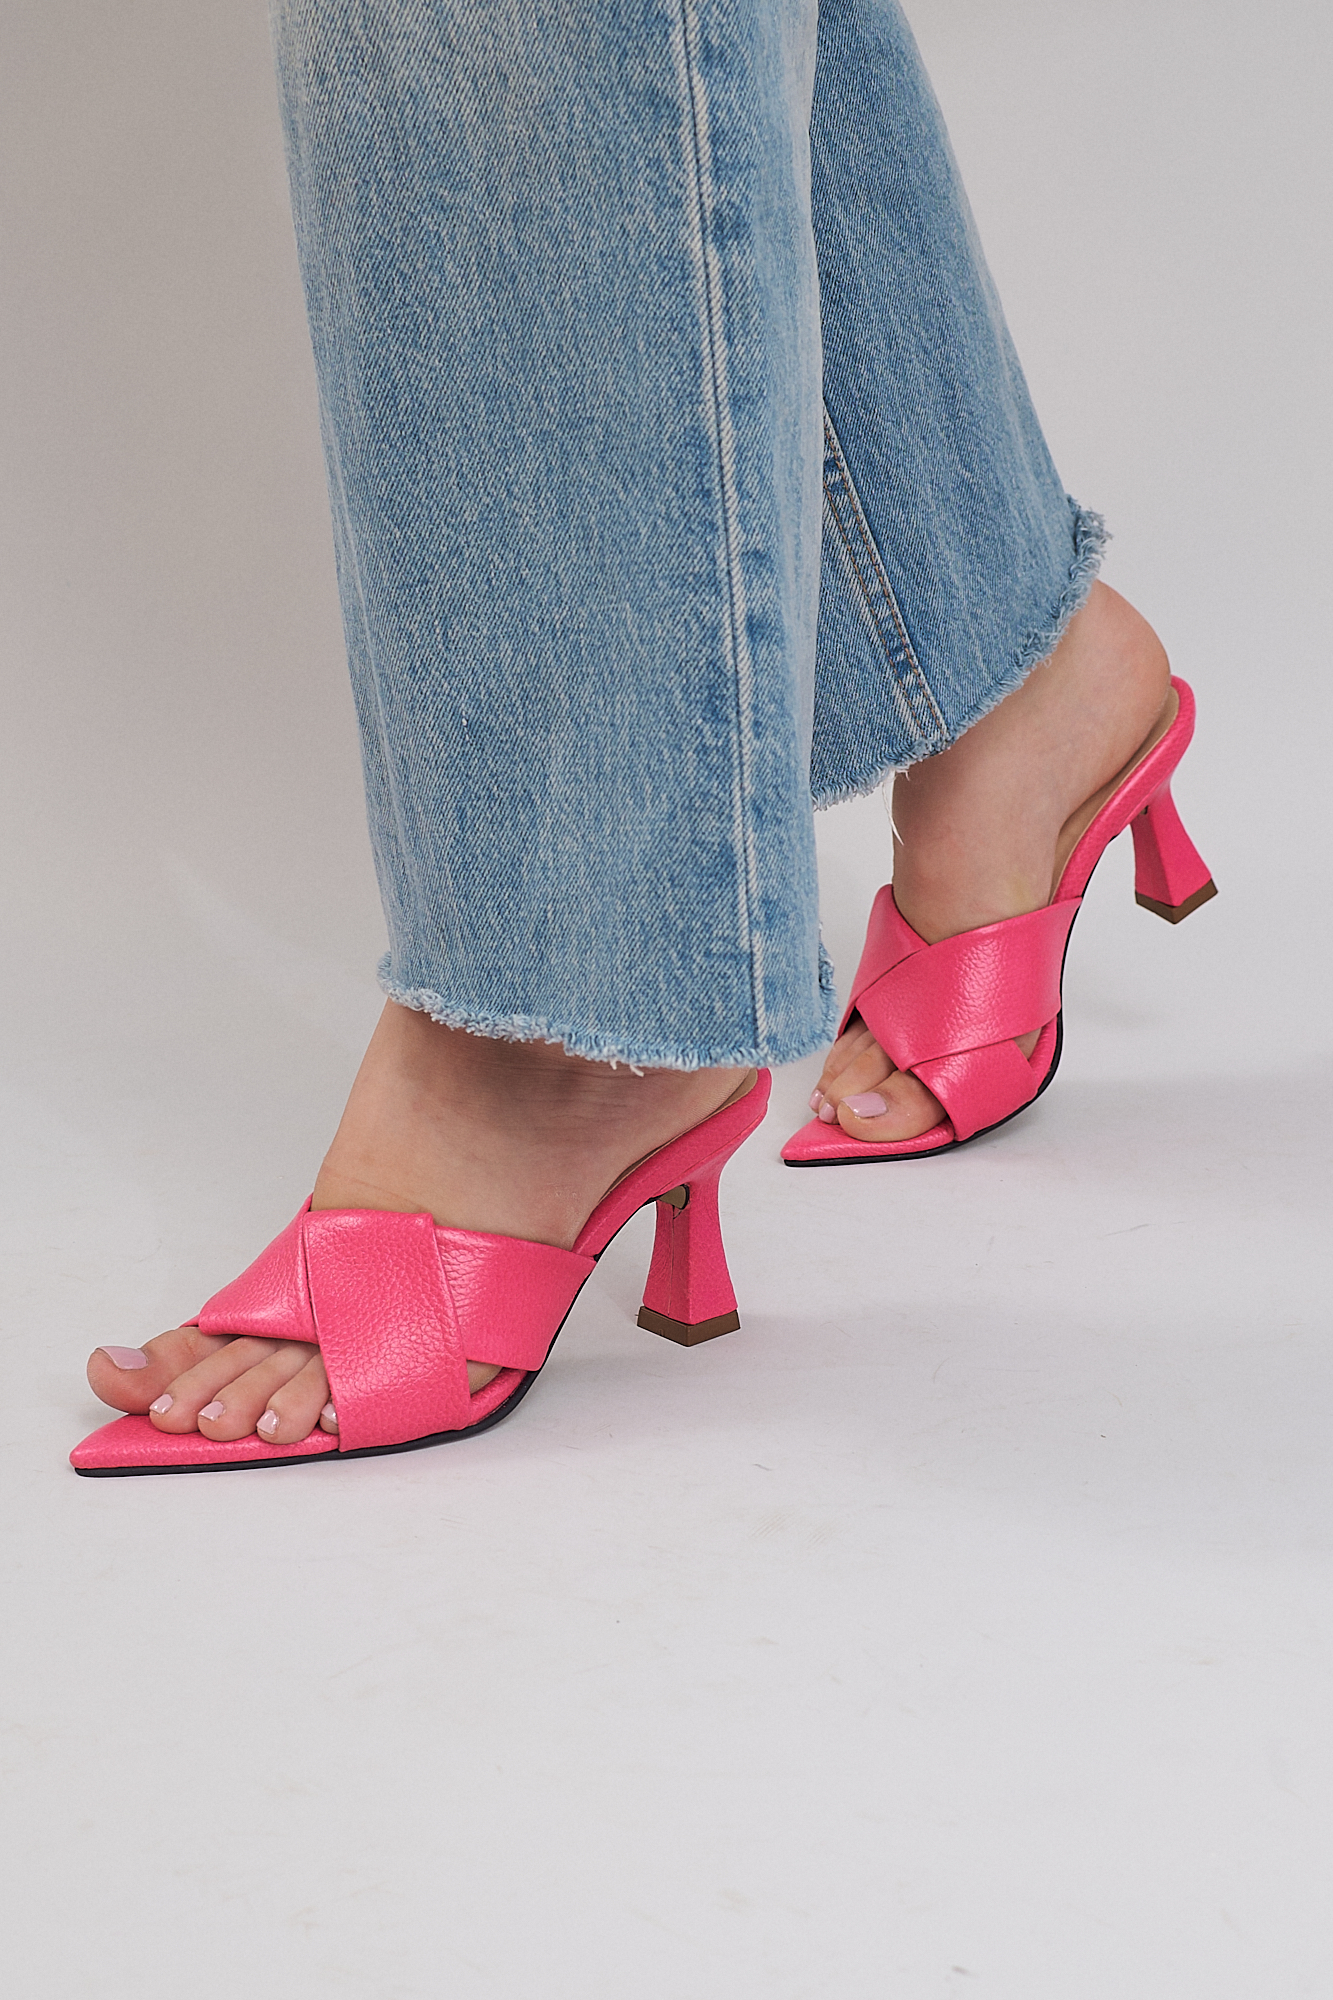 girl with jeans wearing pink peep toe pumps from emilia merz